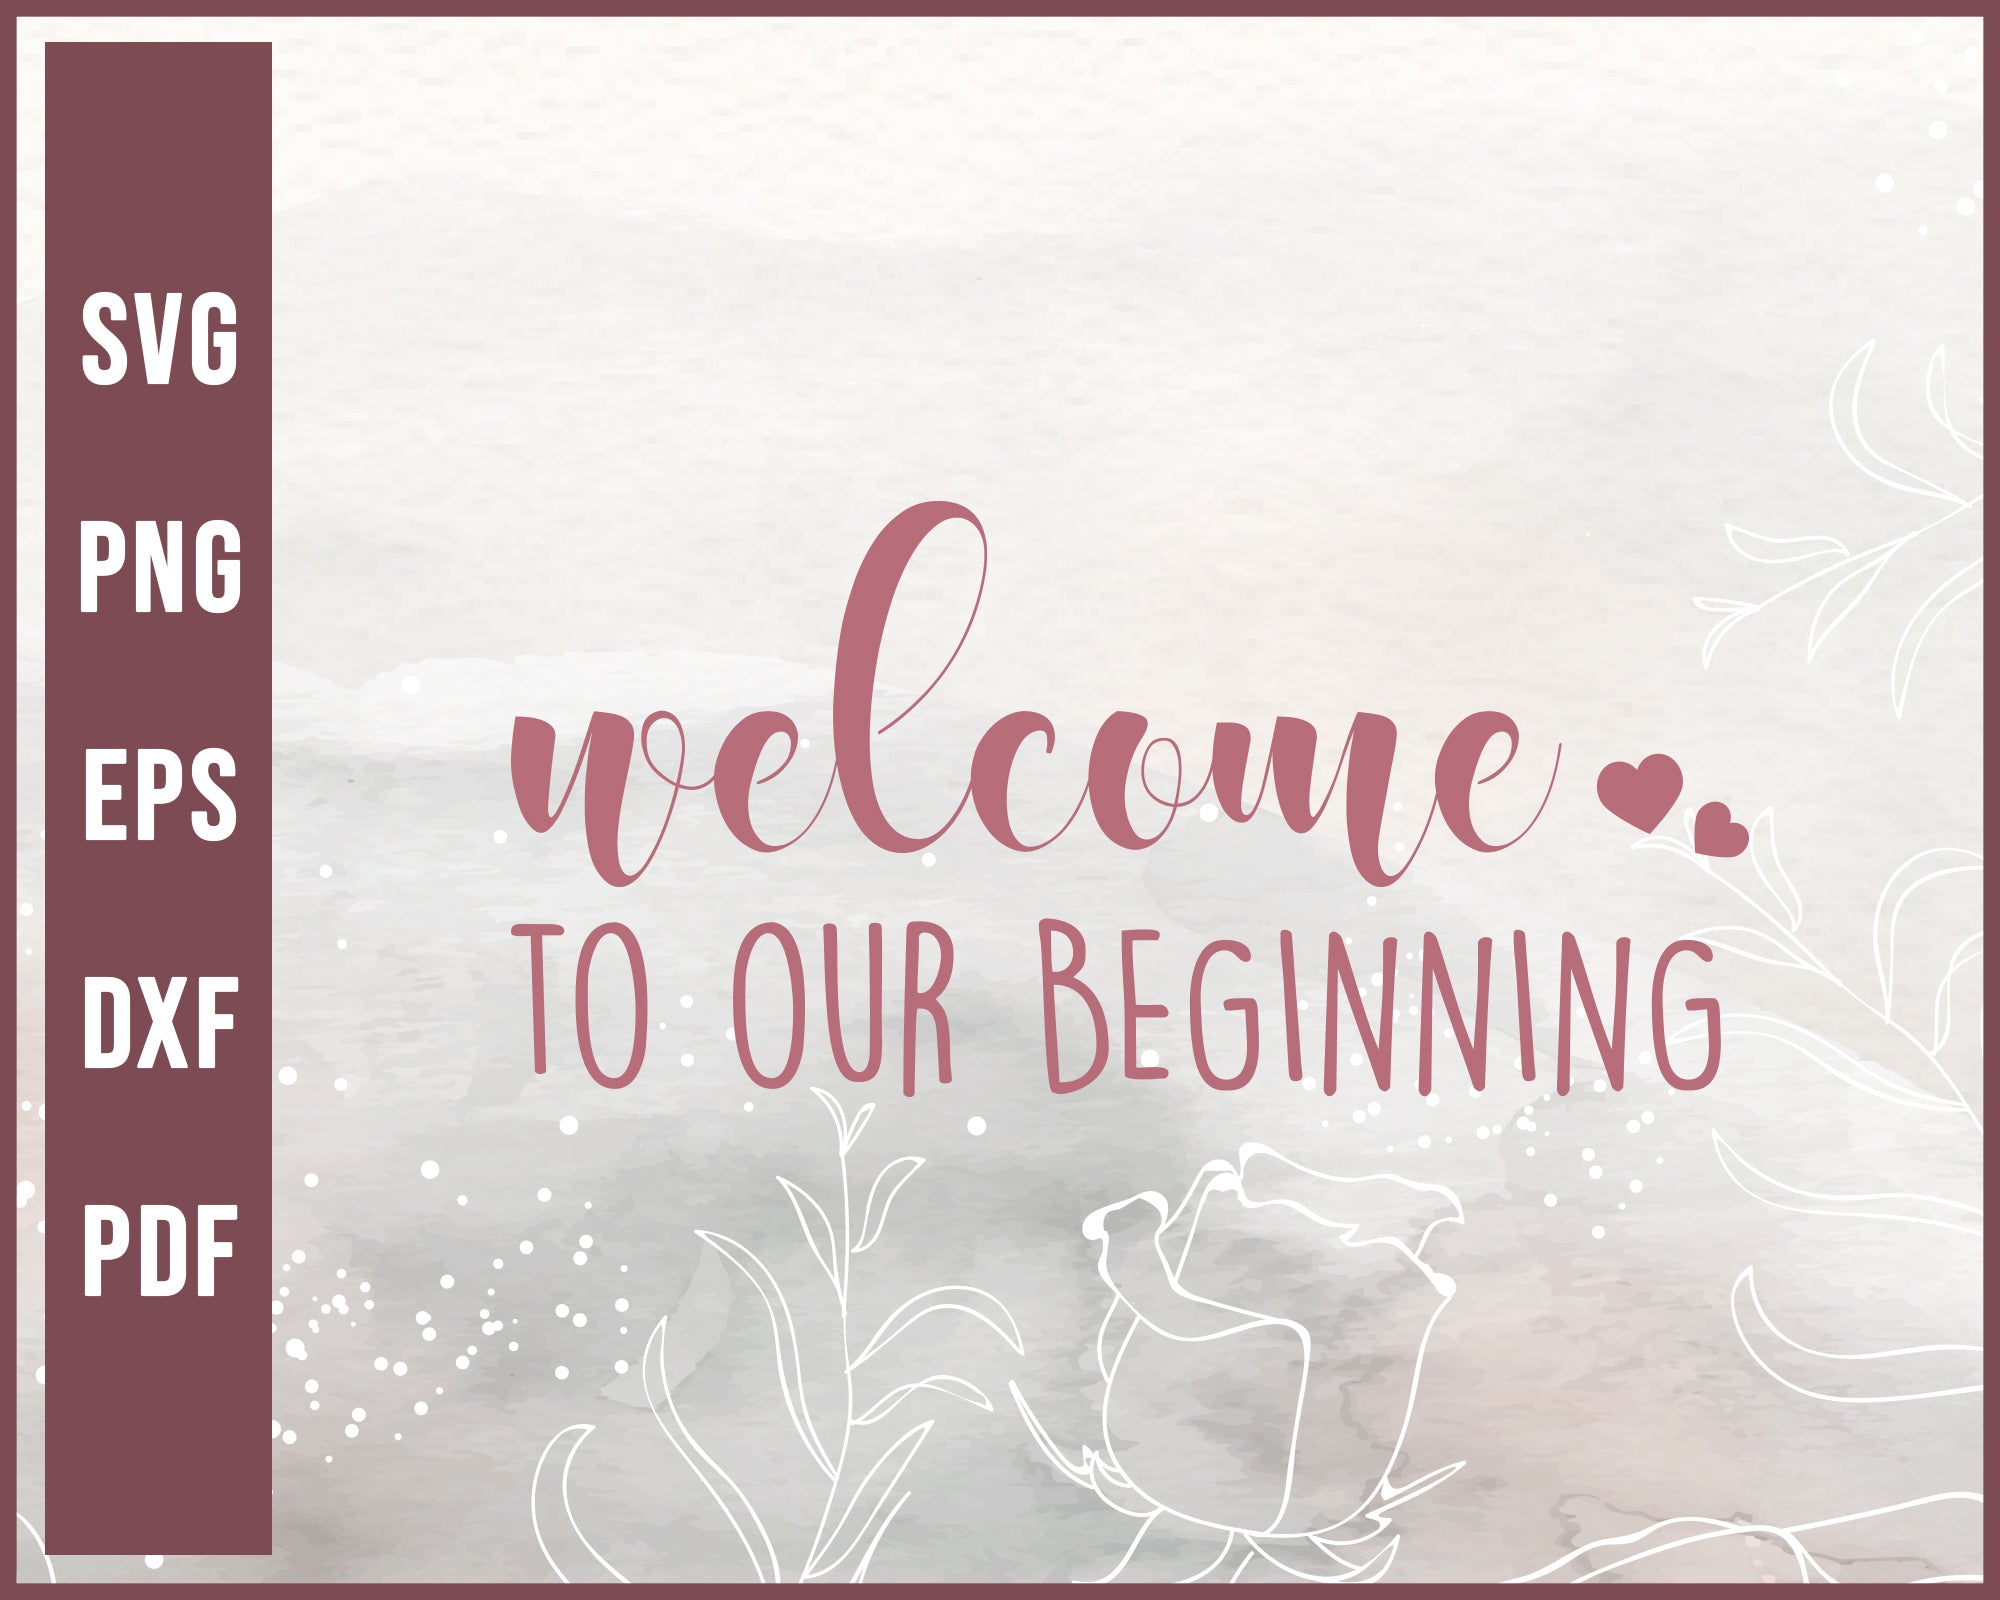 Welcome lto our beginning Wedding svg Designs For Cricut Silhouette And eps png Printable Files